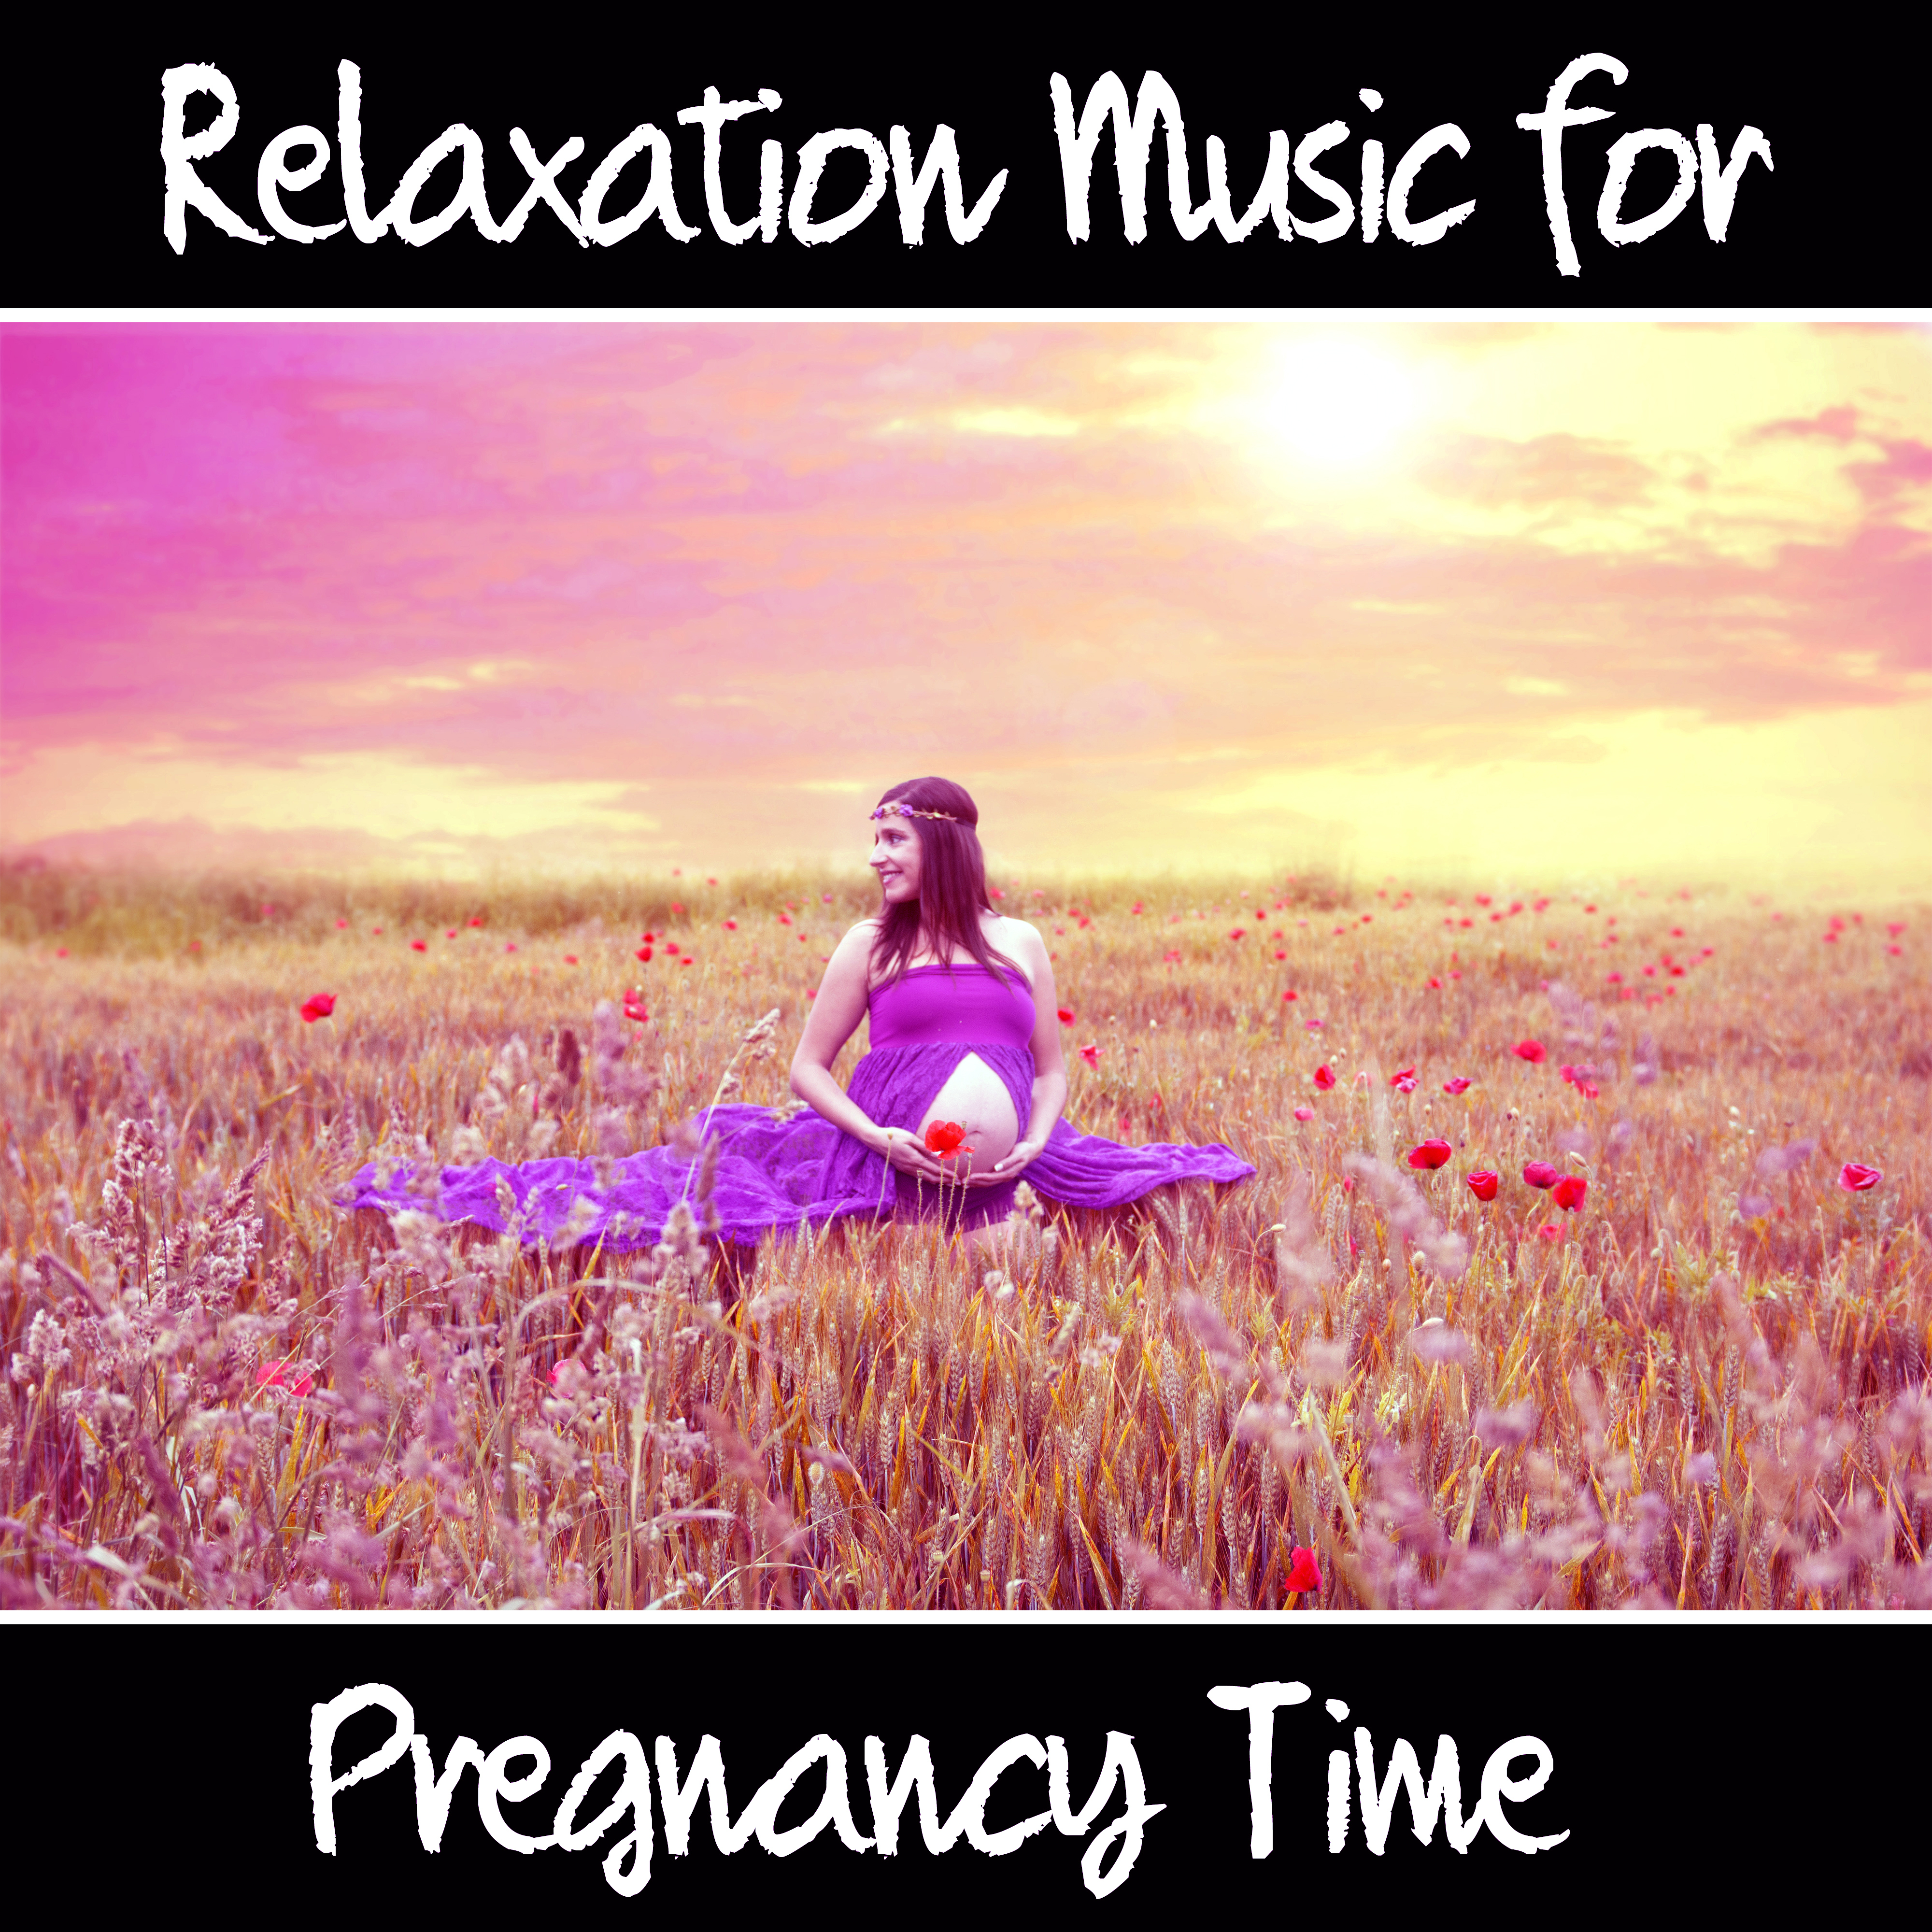 Relaxation Music for Pregnancy Time – Soothing Sounds of Nature for Relaxation in Pregnant, Yoga Music, Pregnancy Meditation, Prenatal Meditation